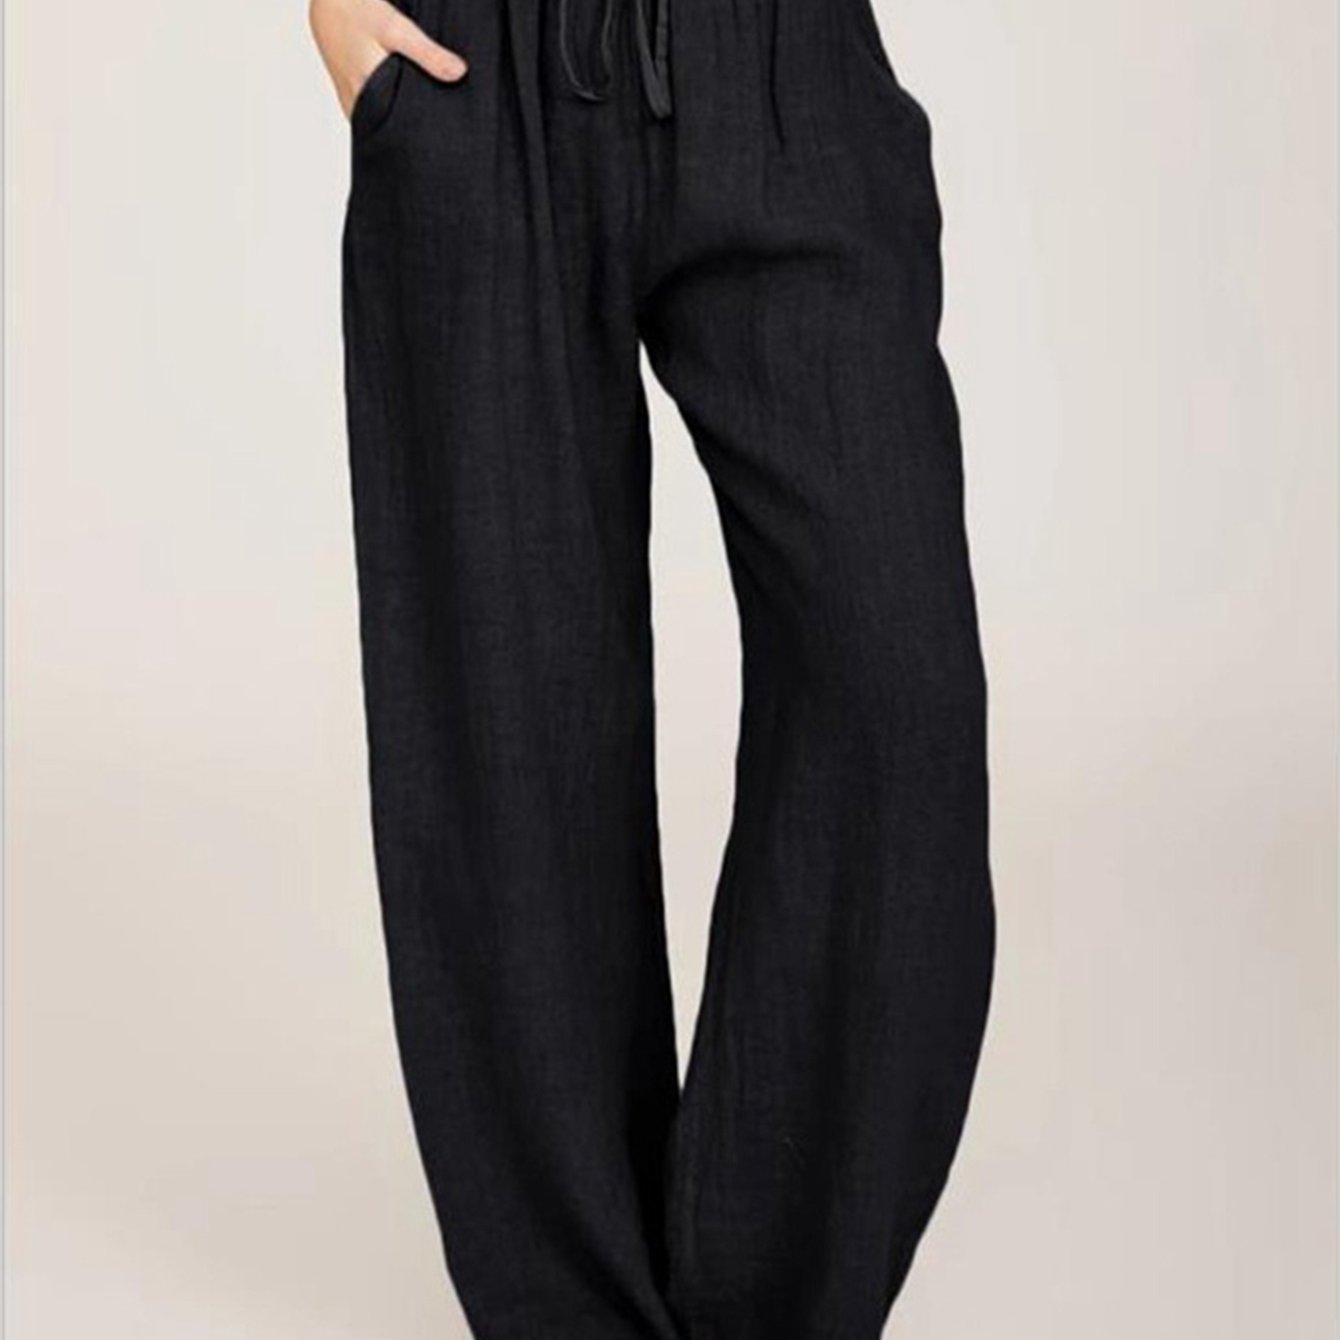 「lovevop」Drawstring Wide Leg Pants, Solid Loose Palazzo Pants, Casual Every Day Pants, Women's Clothing